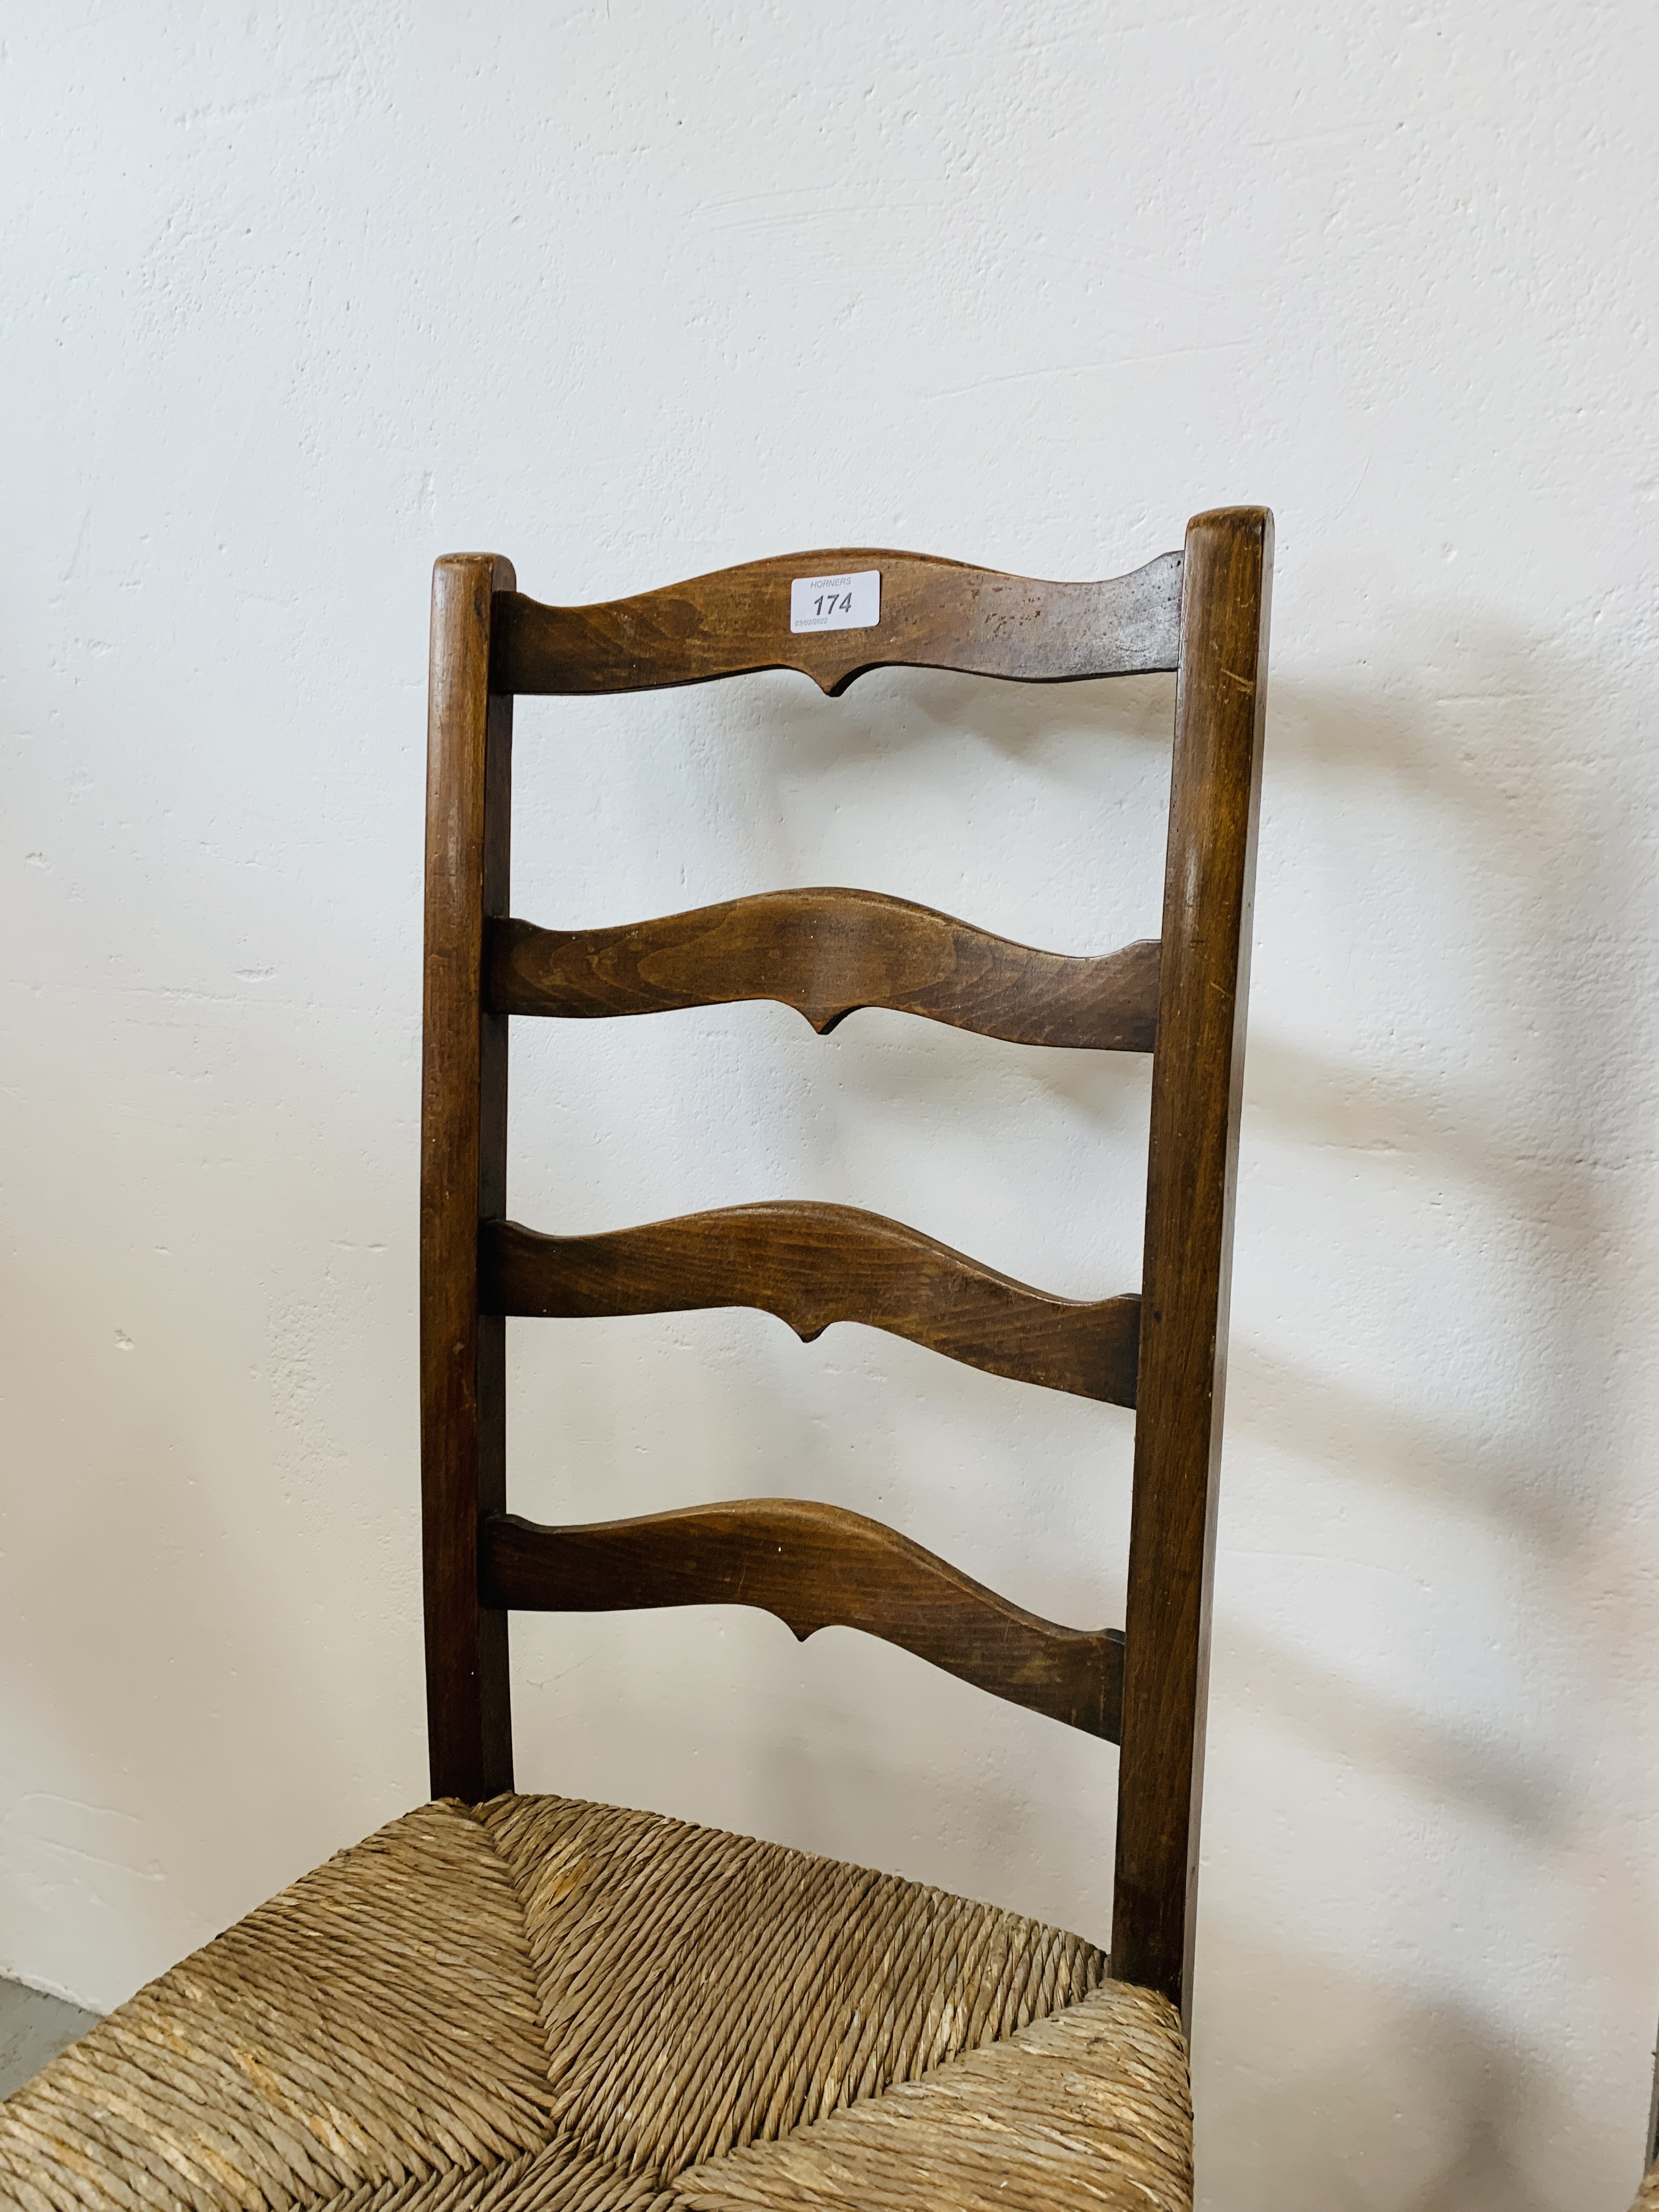 A PAIR OF ANTIQUE OAK LADDER BACK RUSH SEATED CHAIRS - Image 8 of 8